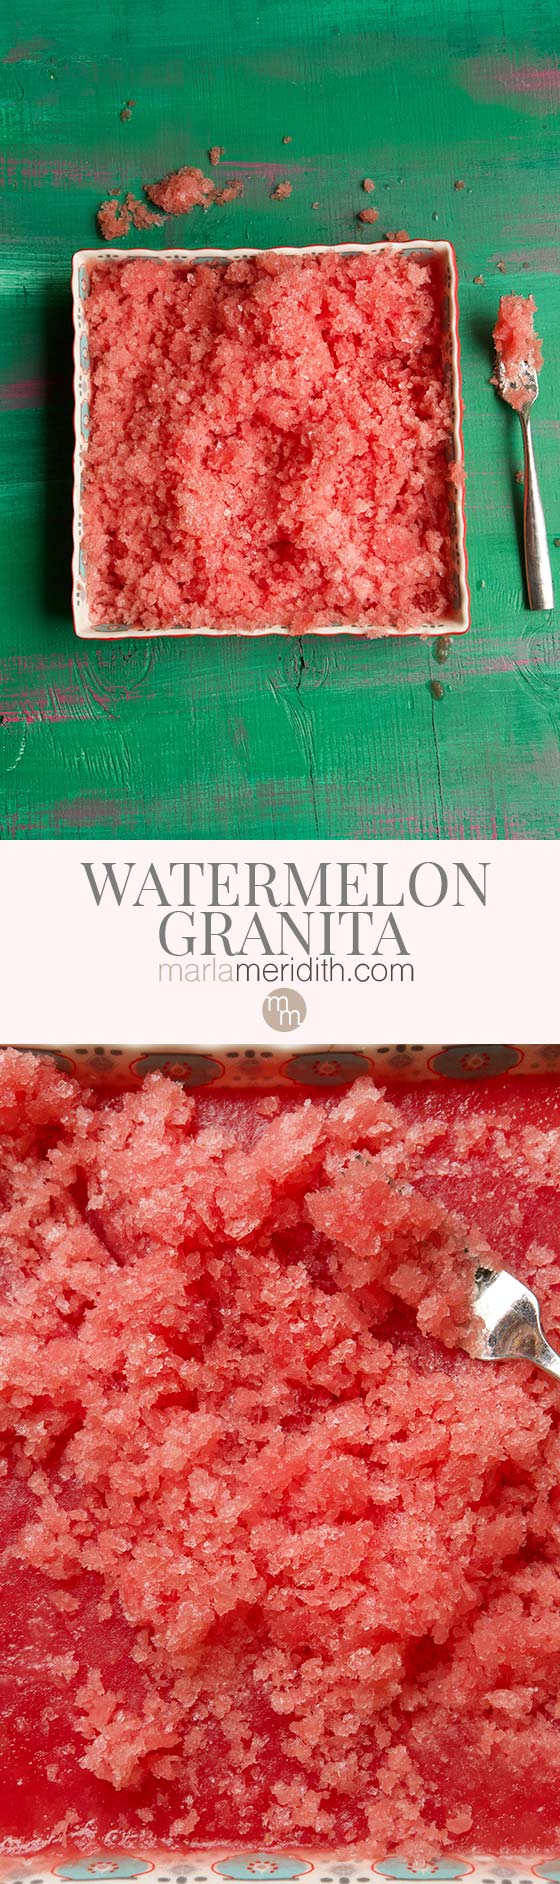 If you love shaved ice then this quick and easy fruity Watermelon Granita will definitely be your jam. Simple to prepare and great for steamy summer days! MarlaMeridith.com